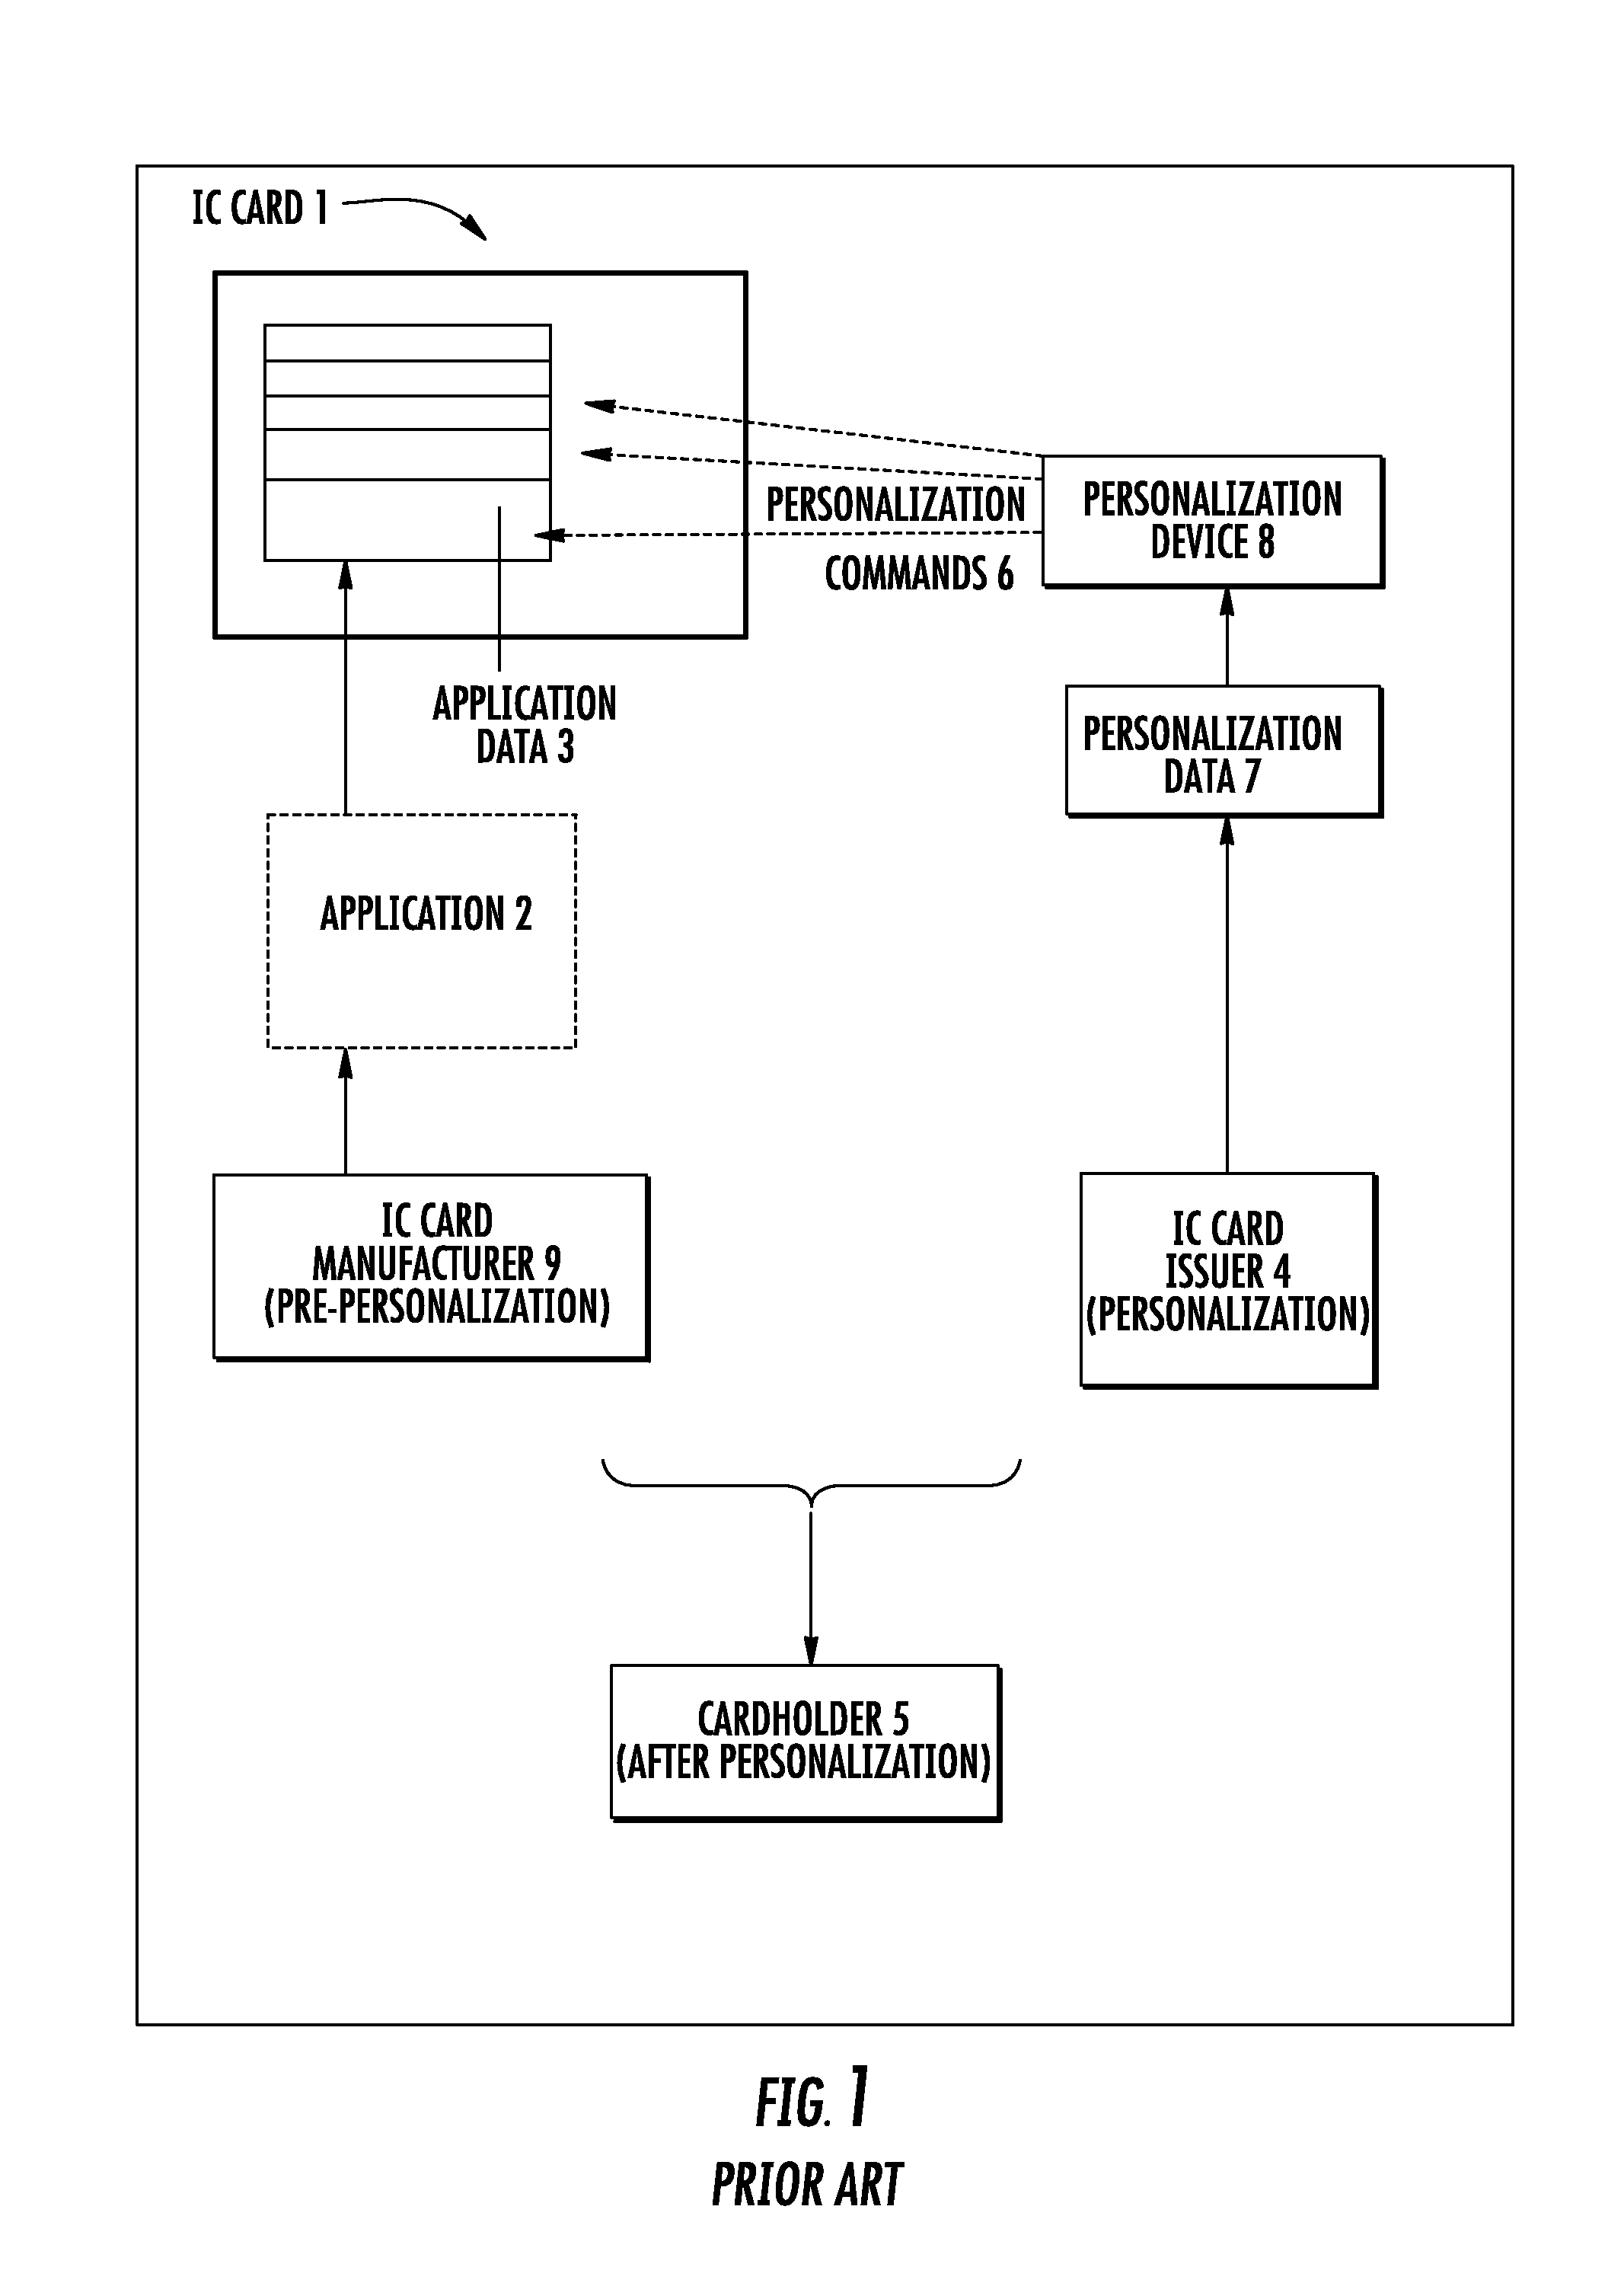 Method for configuring an IC card in order to receive personalization commands